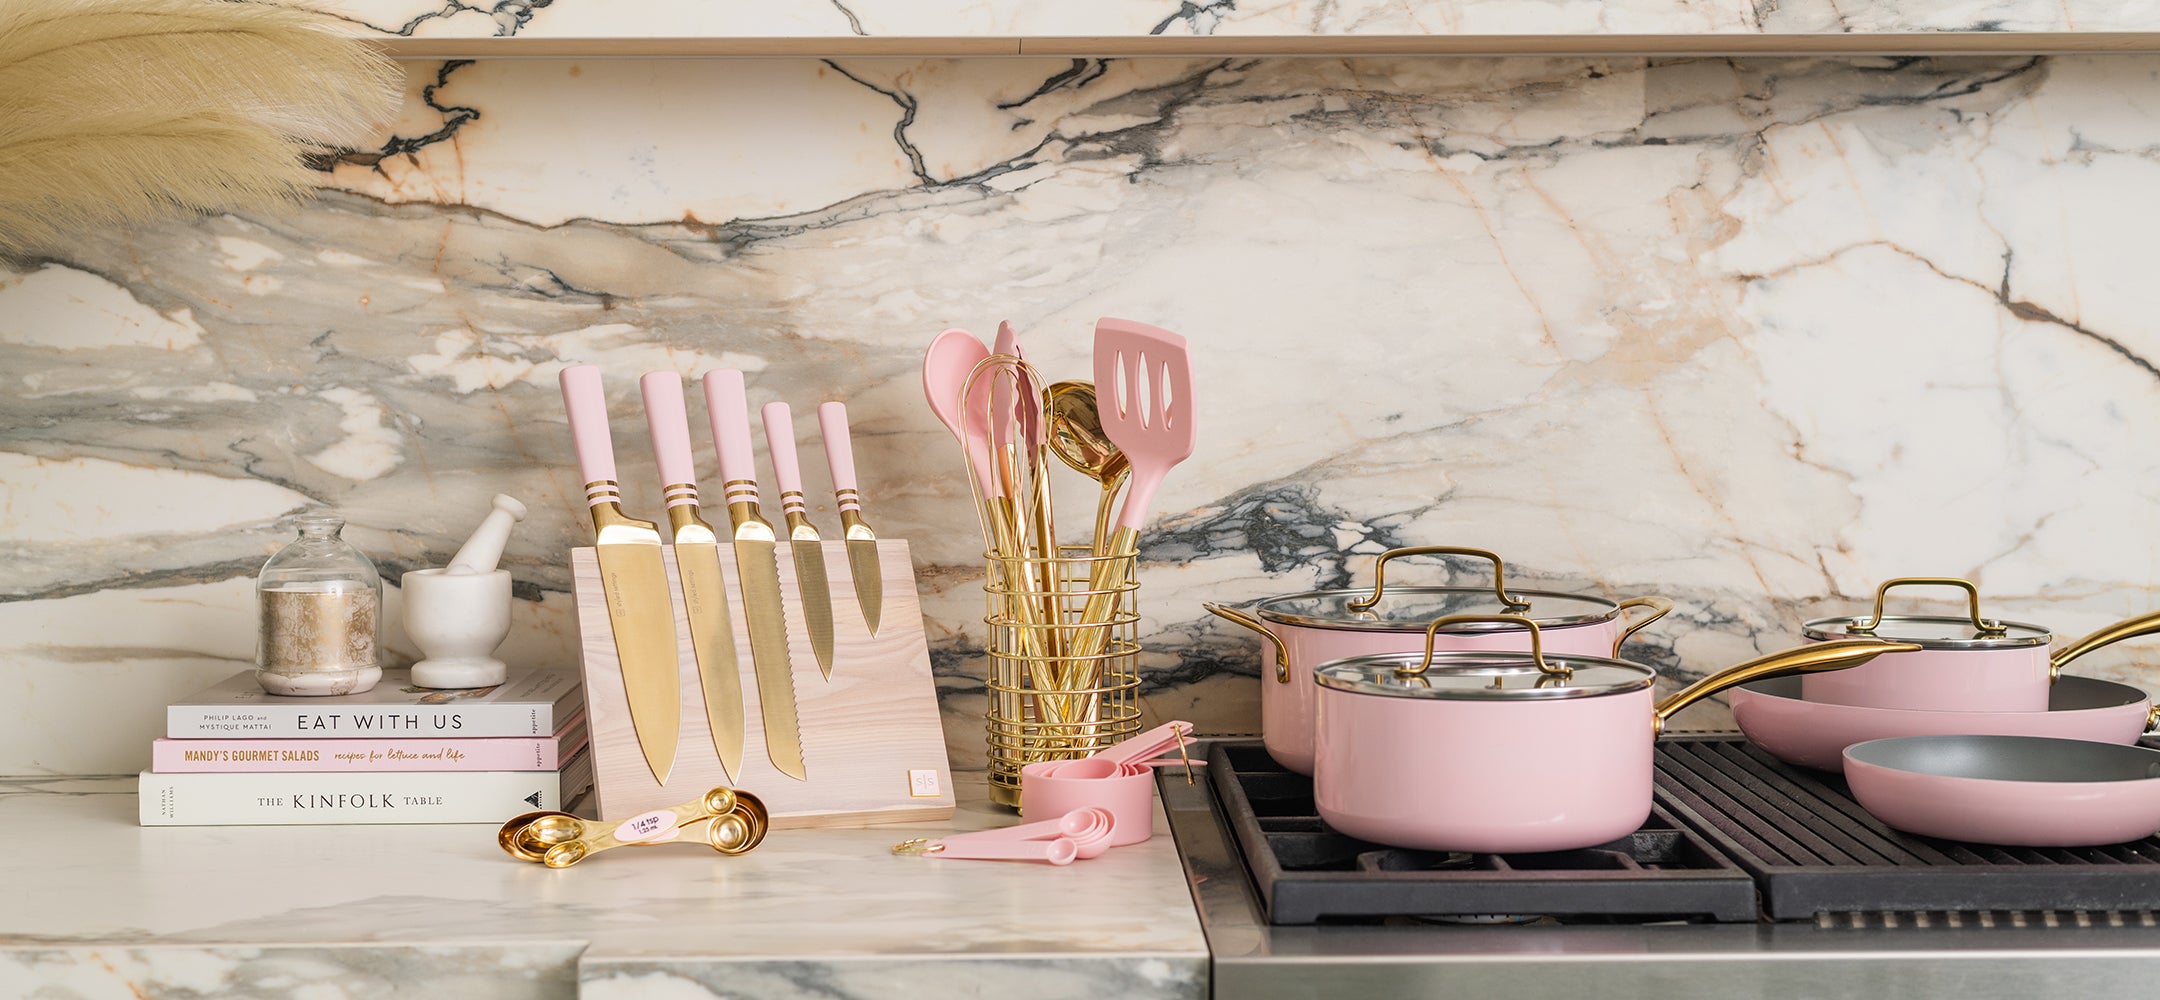 Styled Settings Pink Knife Set with Magnetic Knife Block - 6 PC